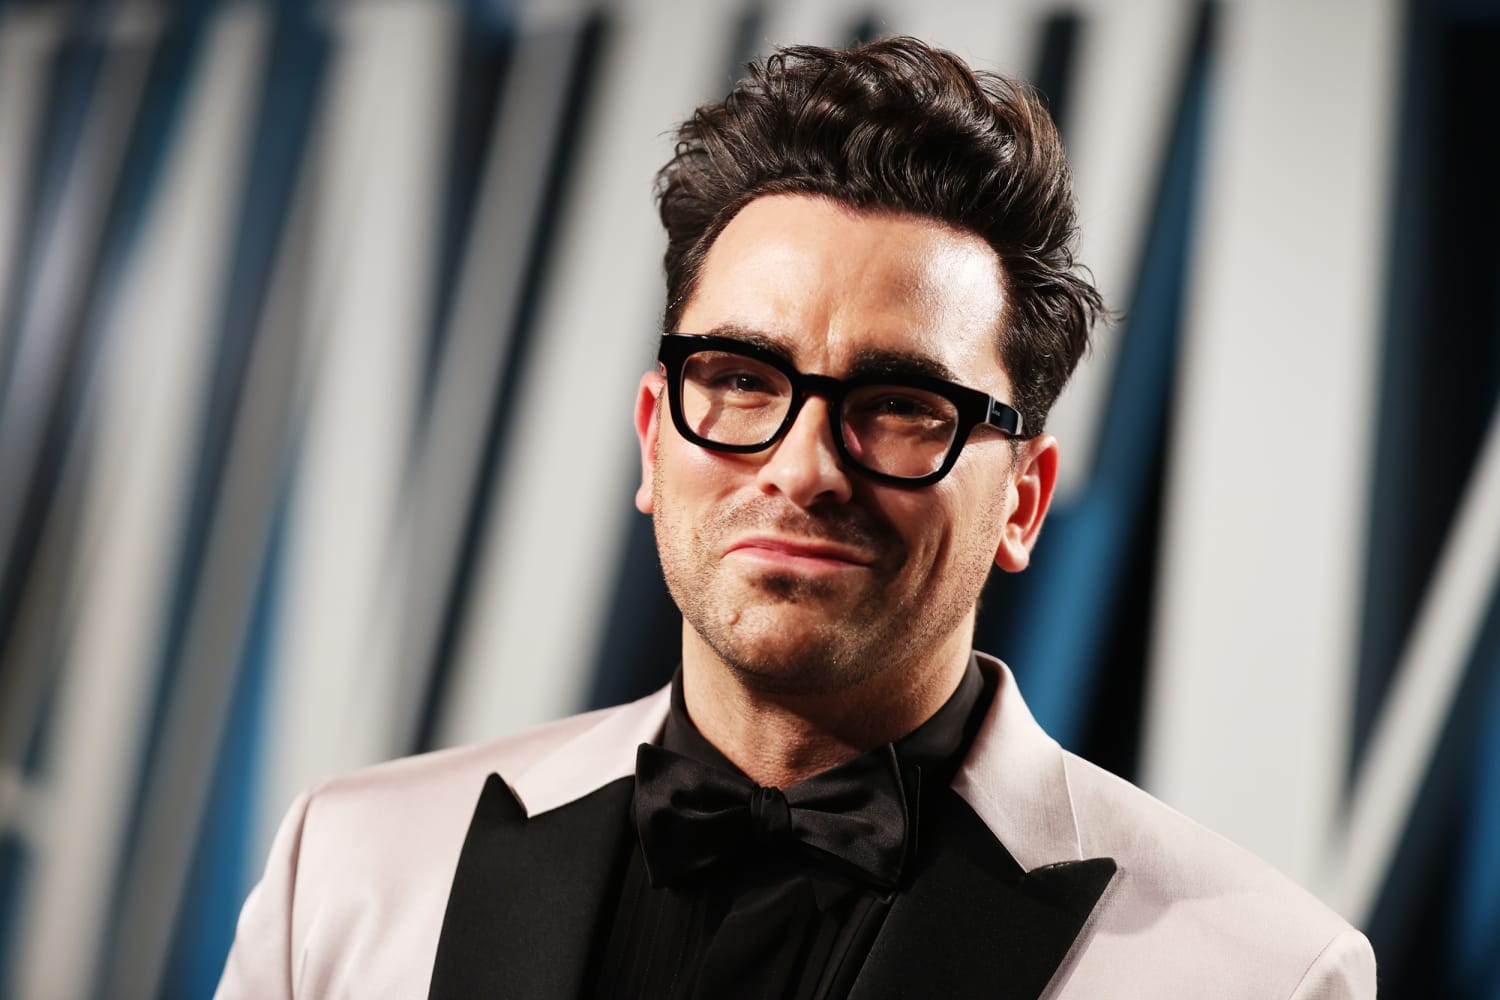 Dan Levy to launch reality cooking series on HBO Max